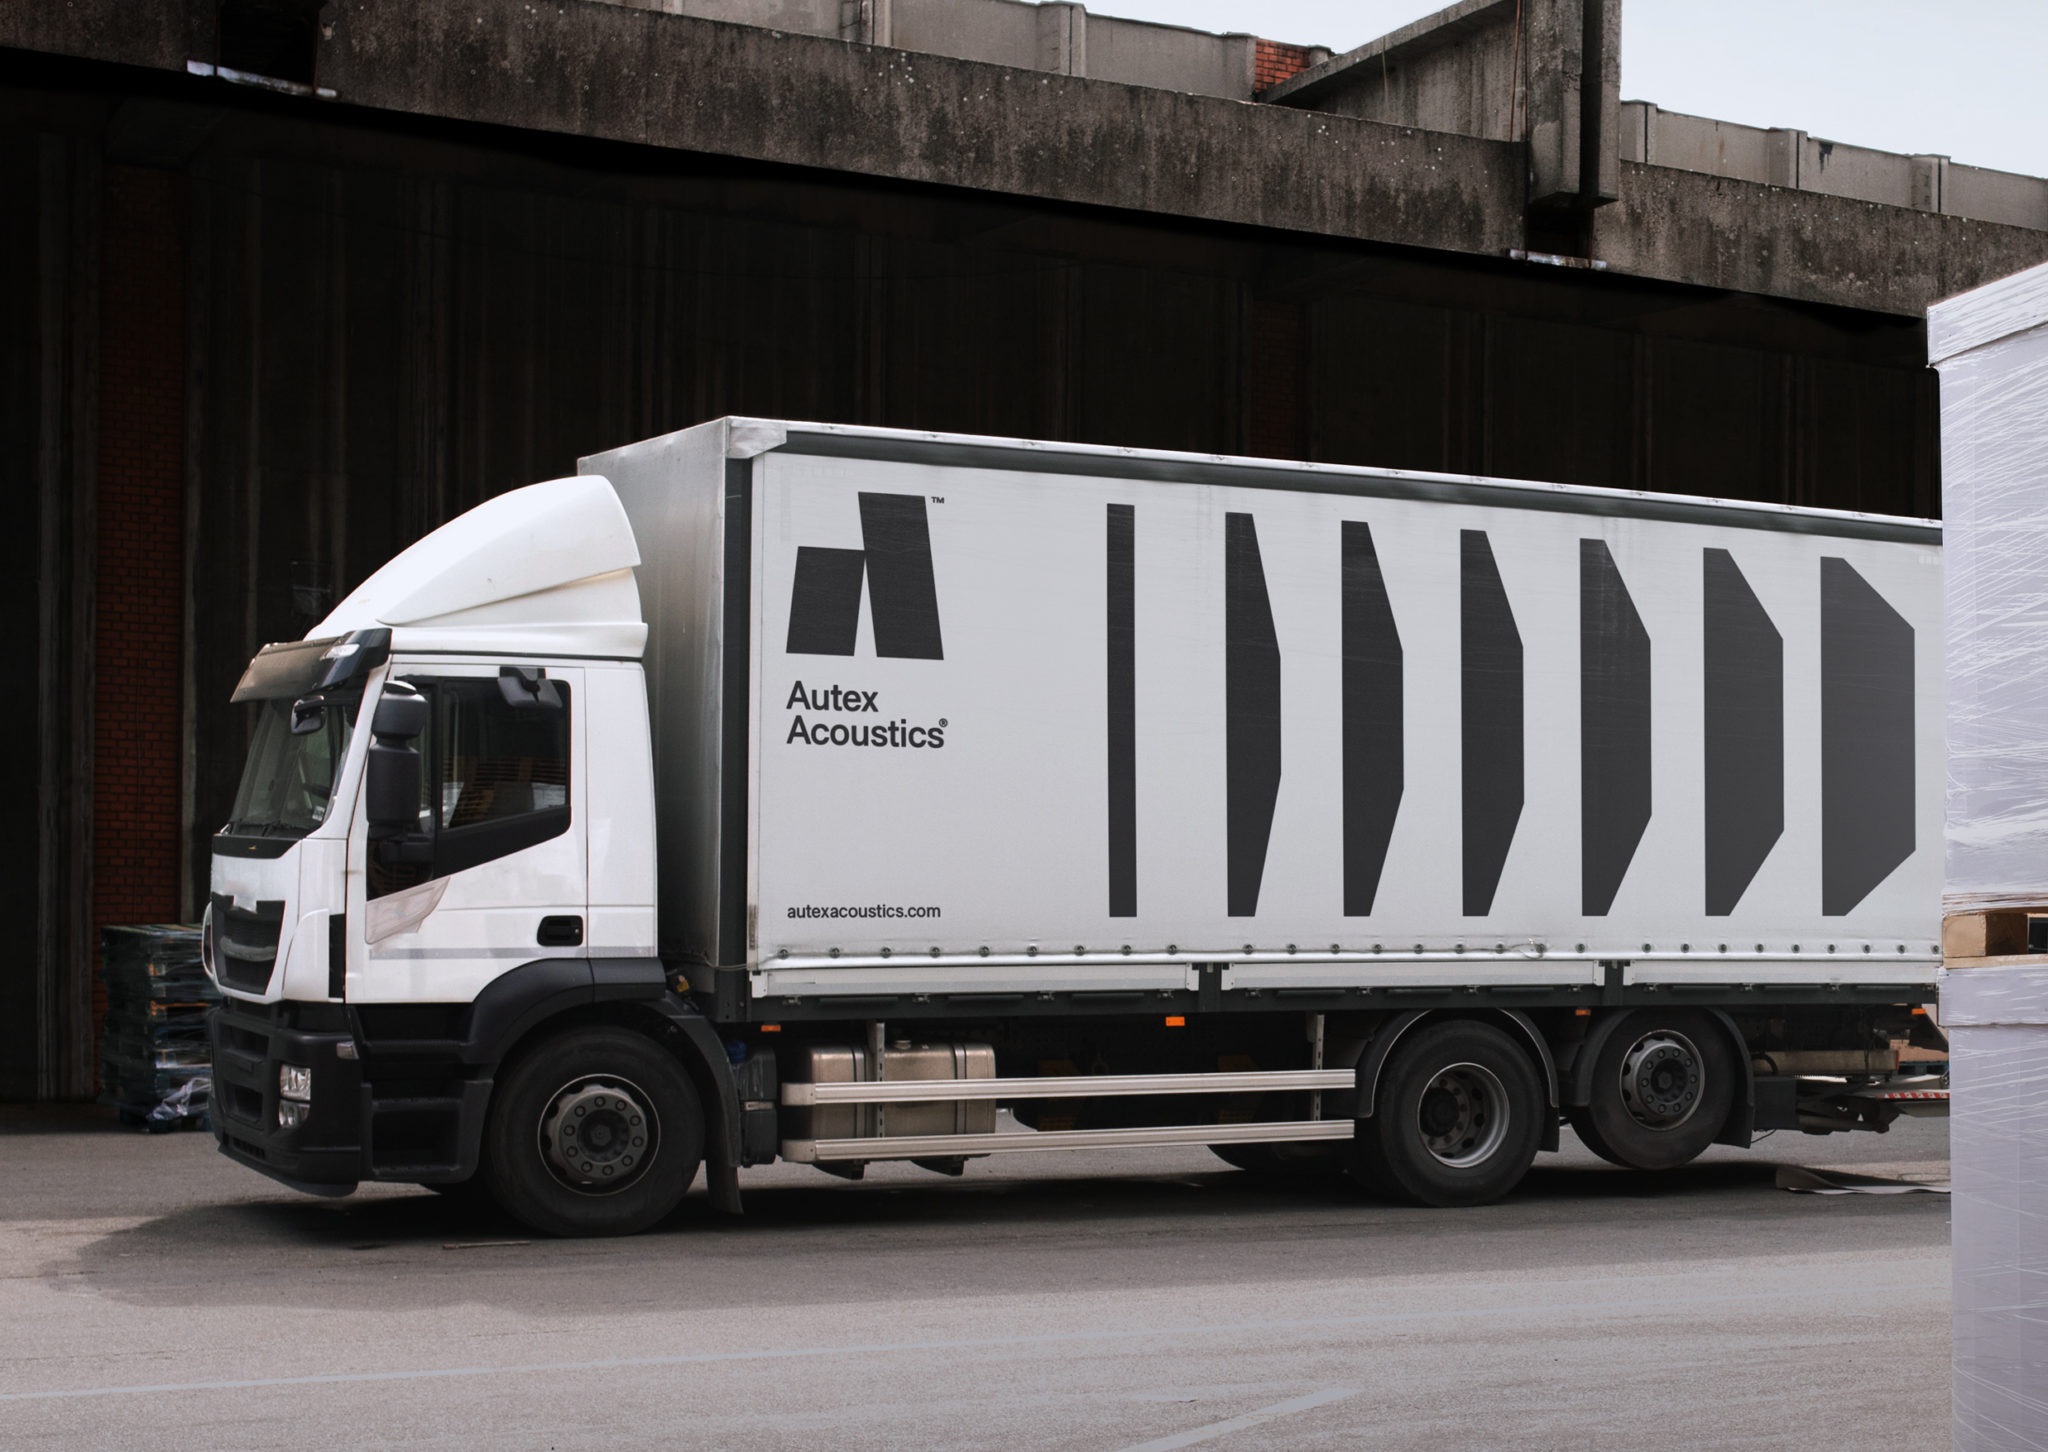 Brand identity and lorry curtain design for Autex Acoustics by Marx Design, New Zealand